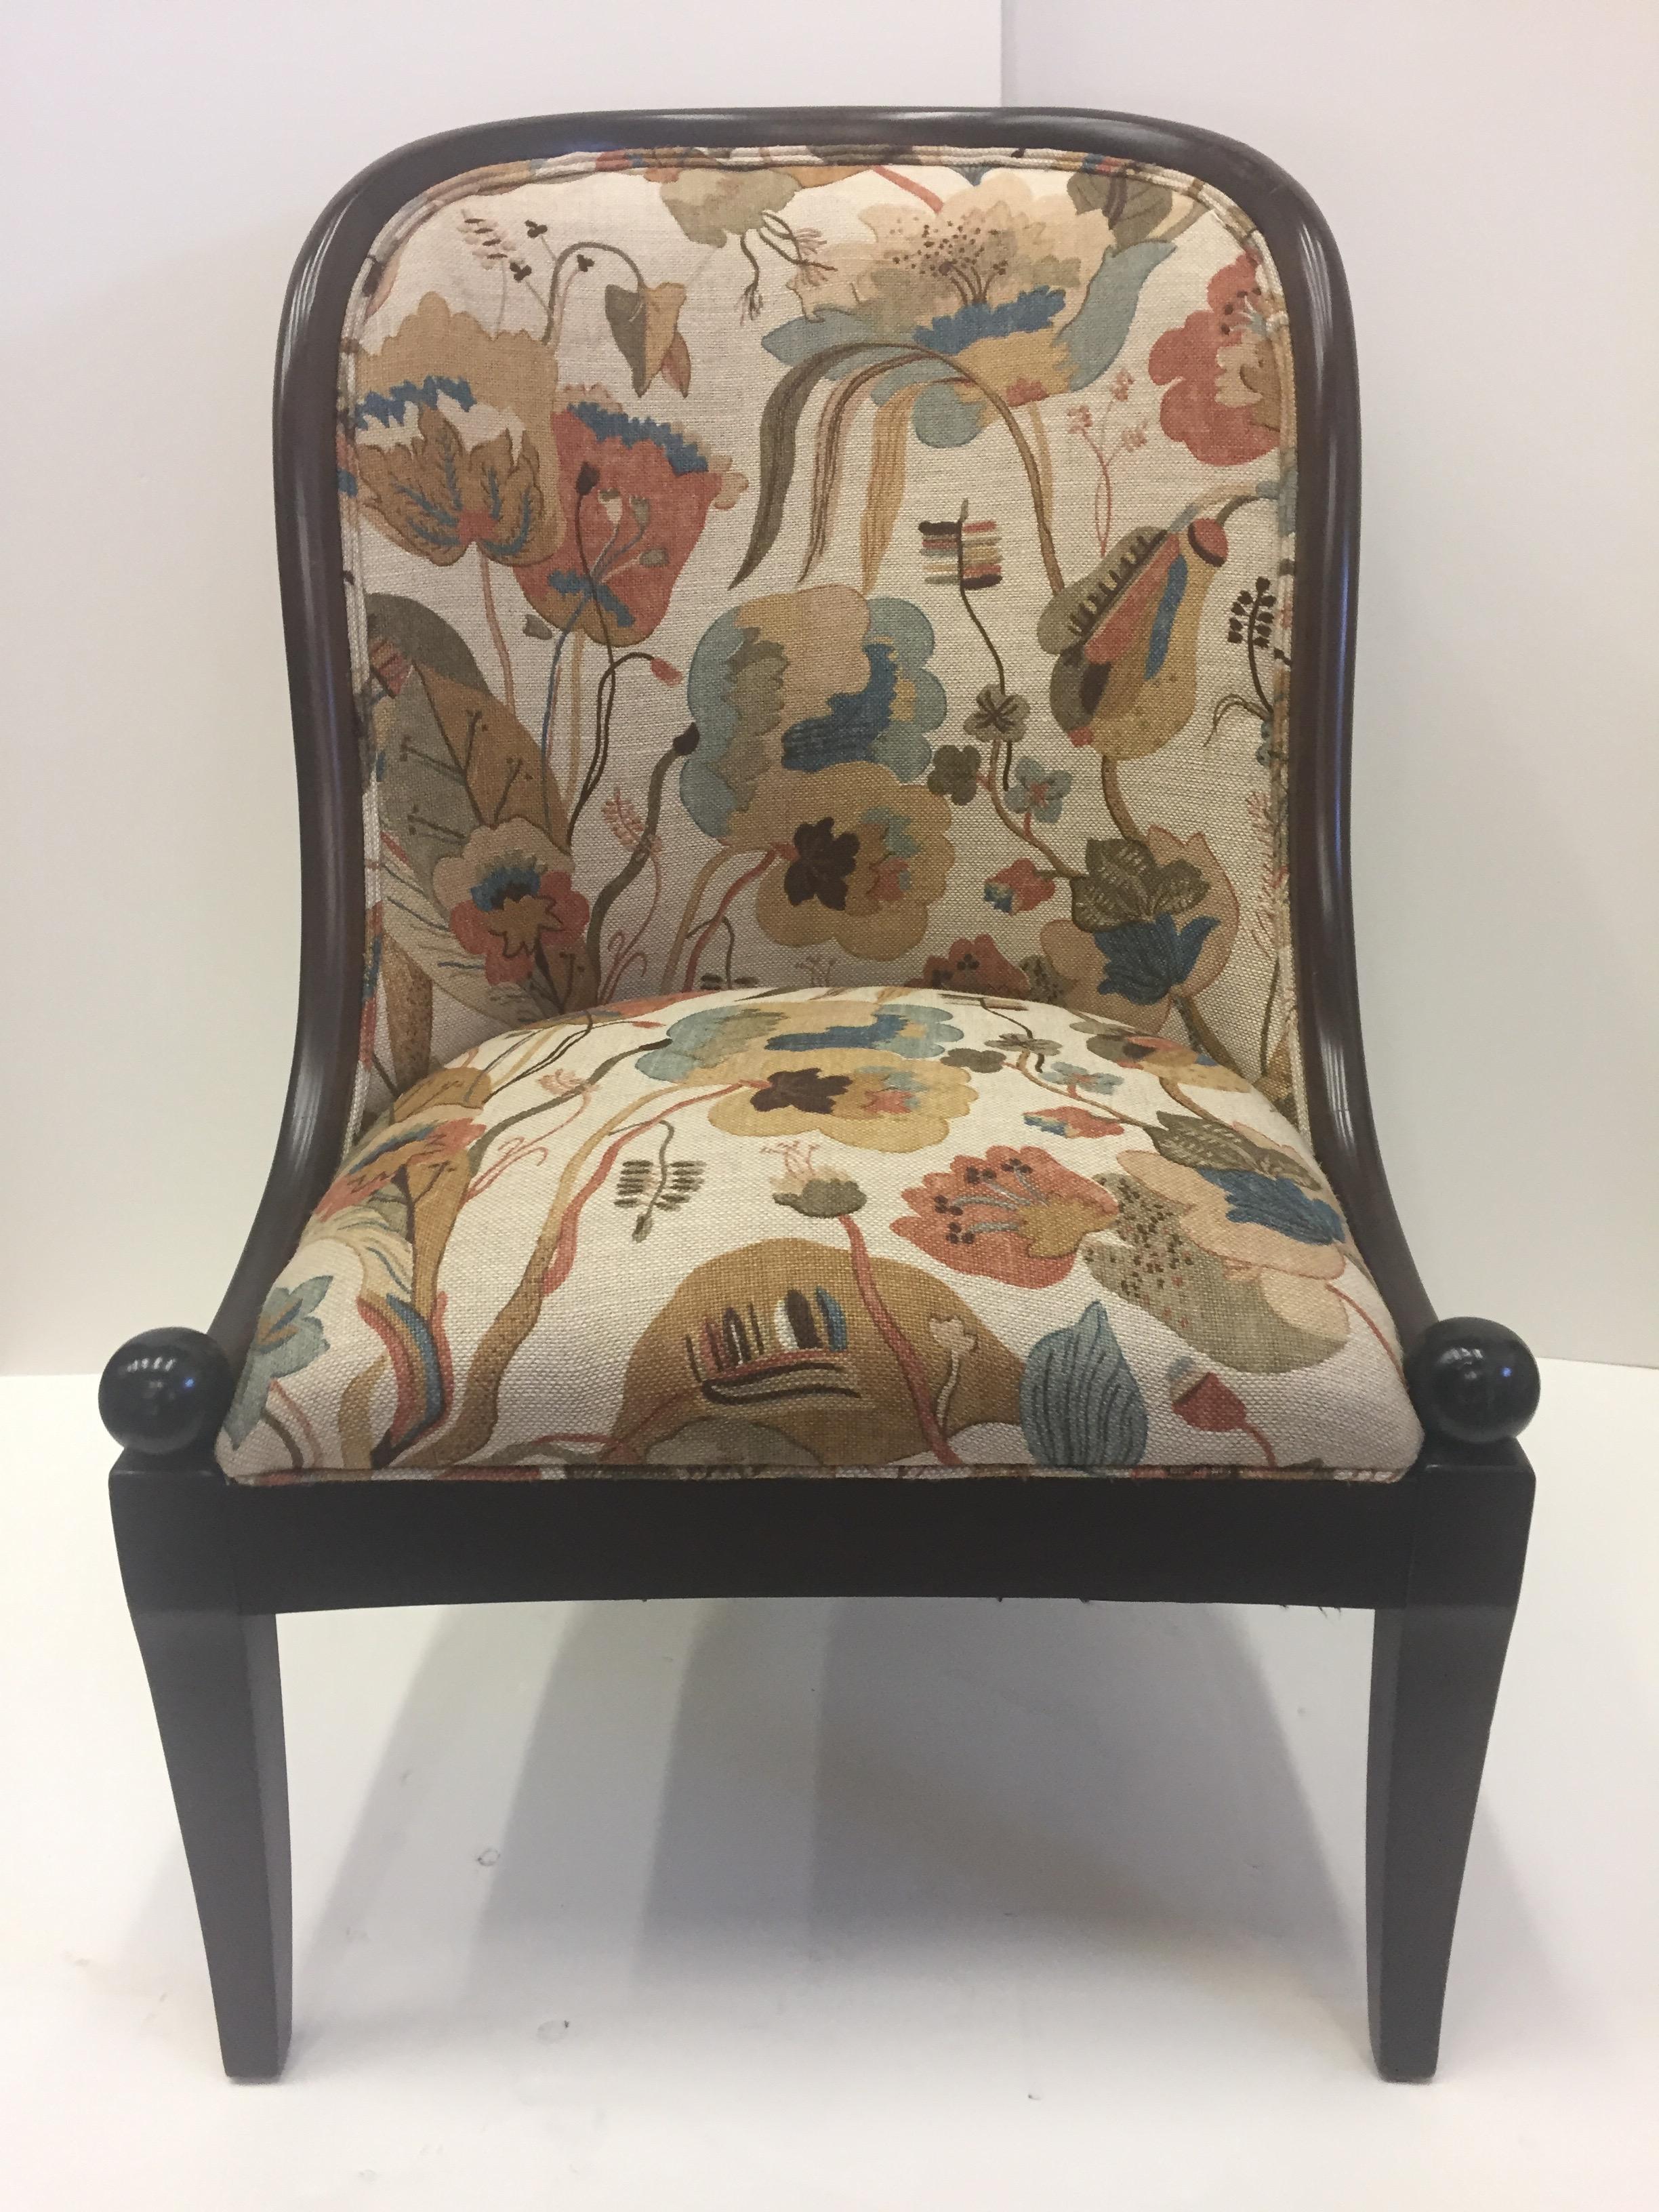 Fine barrel shaped club chair by Baker with gorgeous shape and Baker upholstery having
a contemporized floral pattern in earth tones. 

Measures: seat height 17.